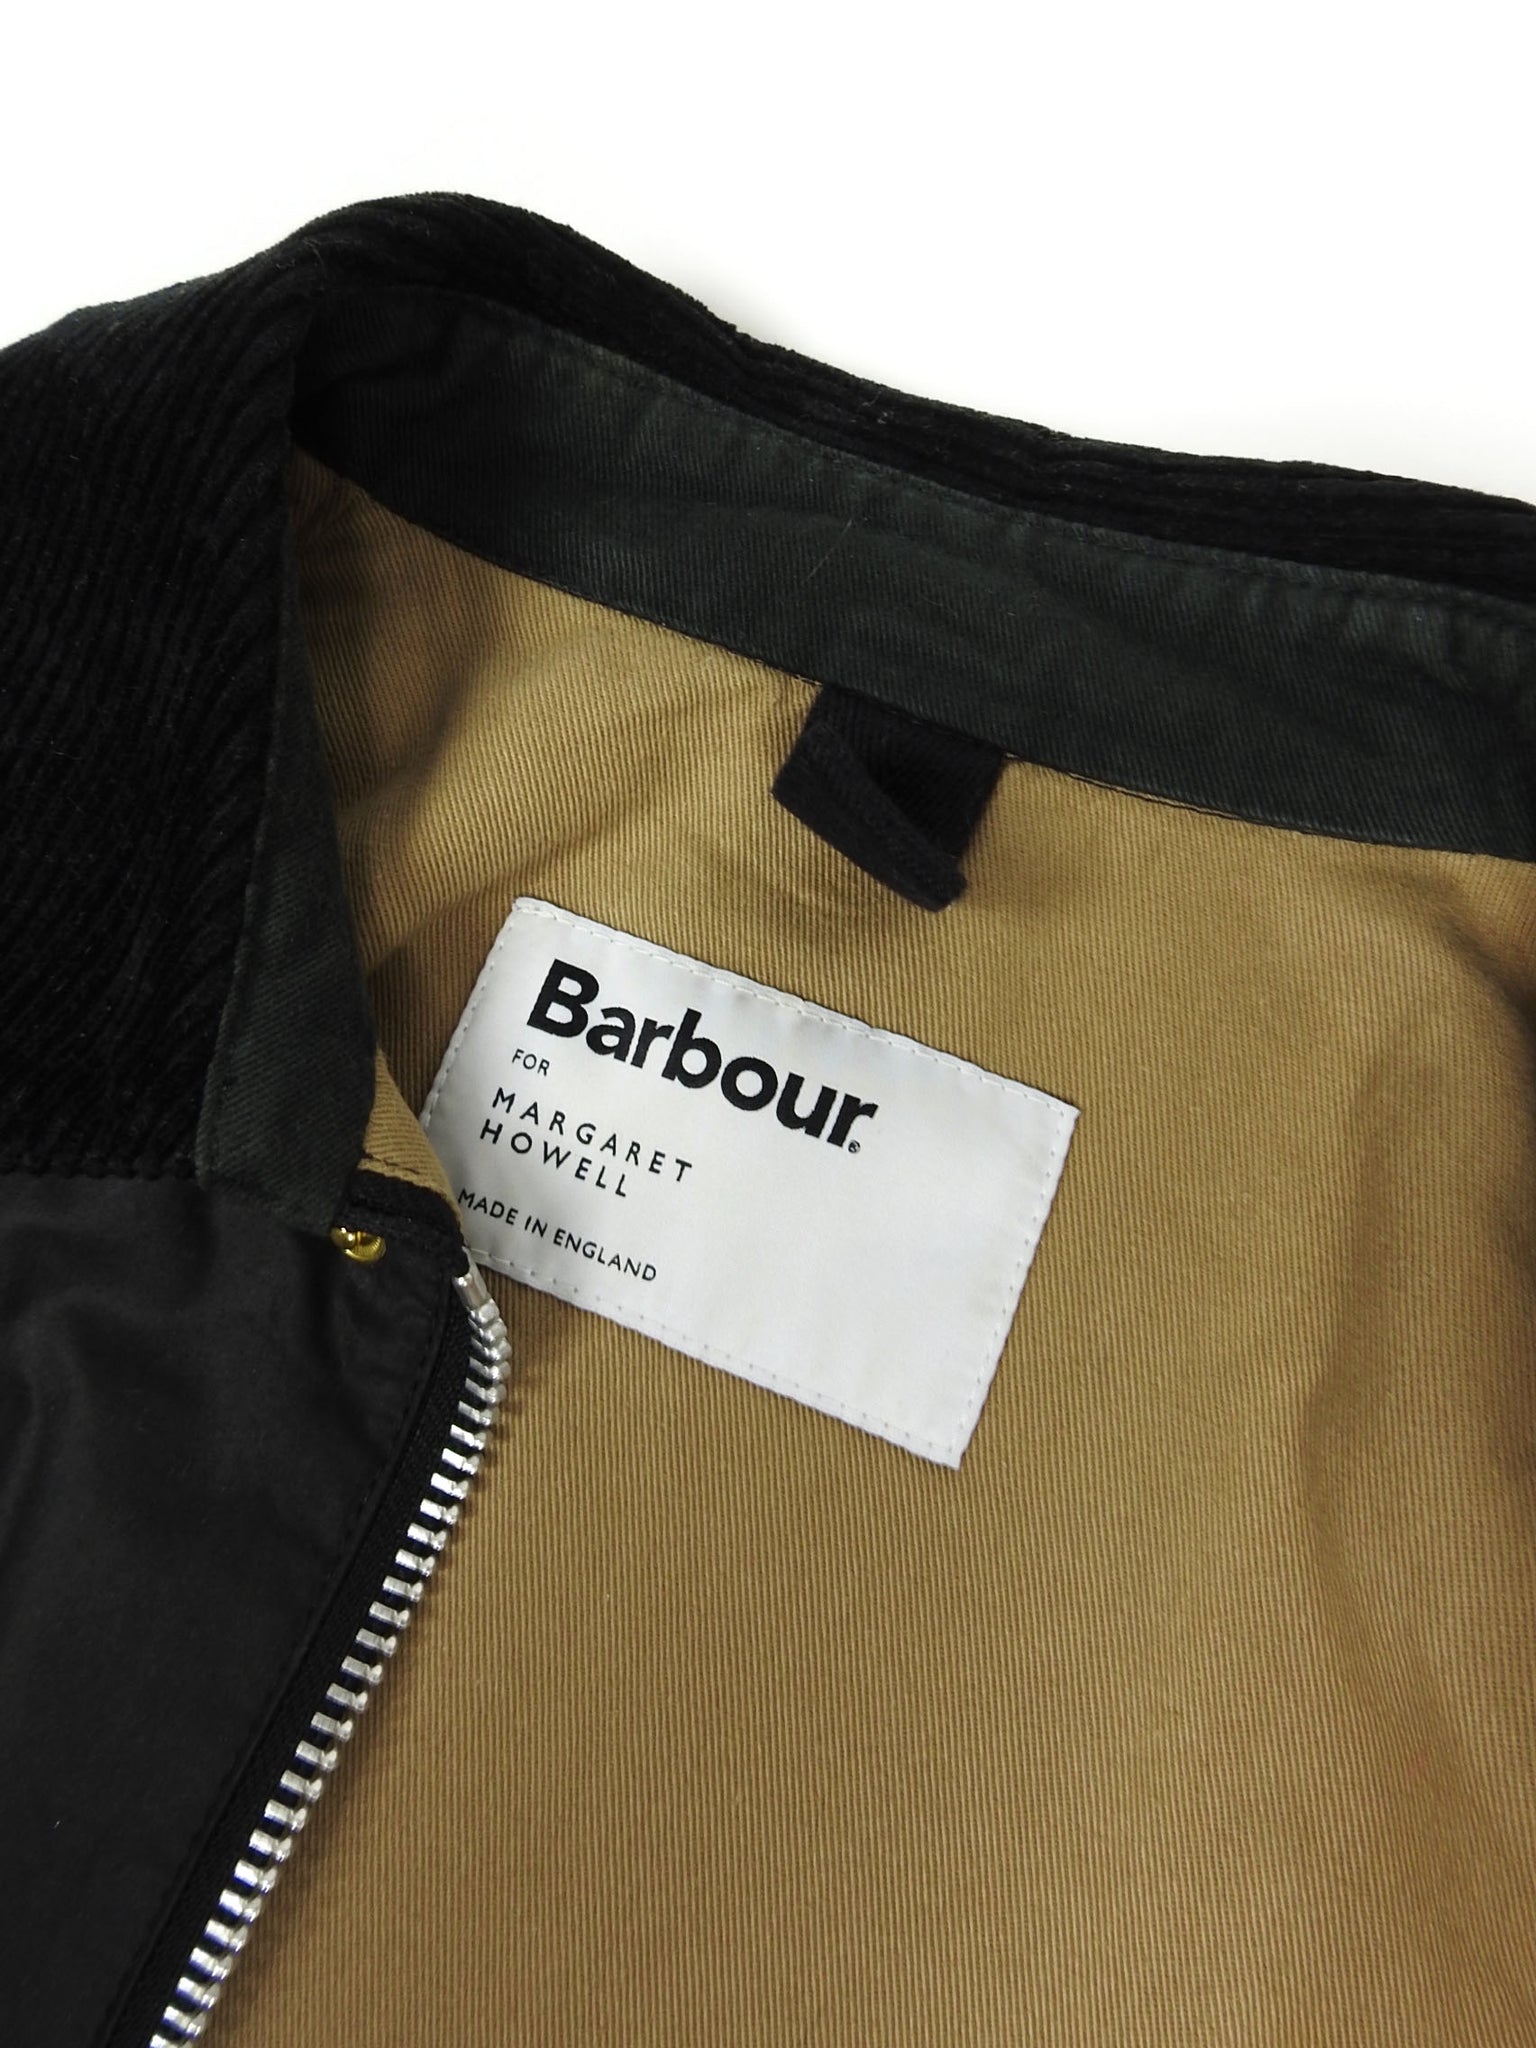 Barbour x Margaret Howell Spey Wax Jacket Size Medium – I Miss You MAN